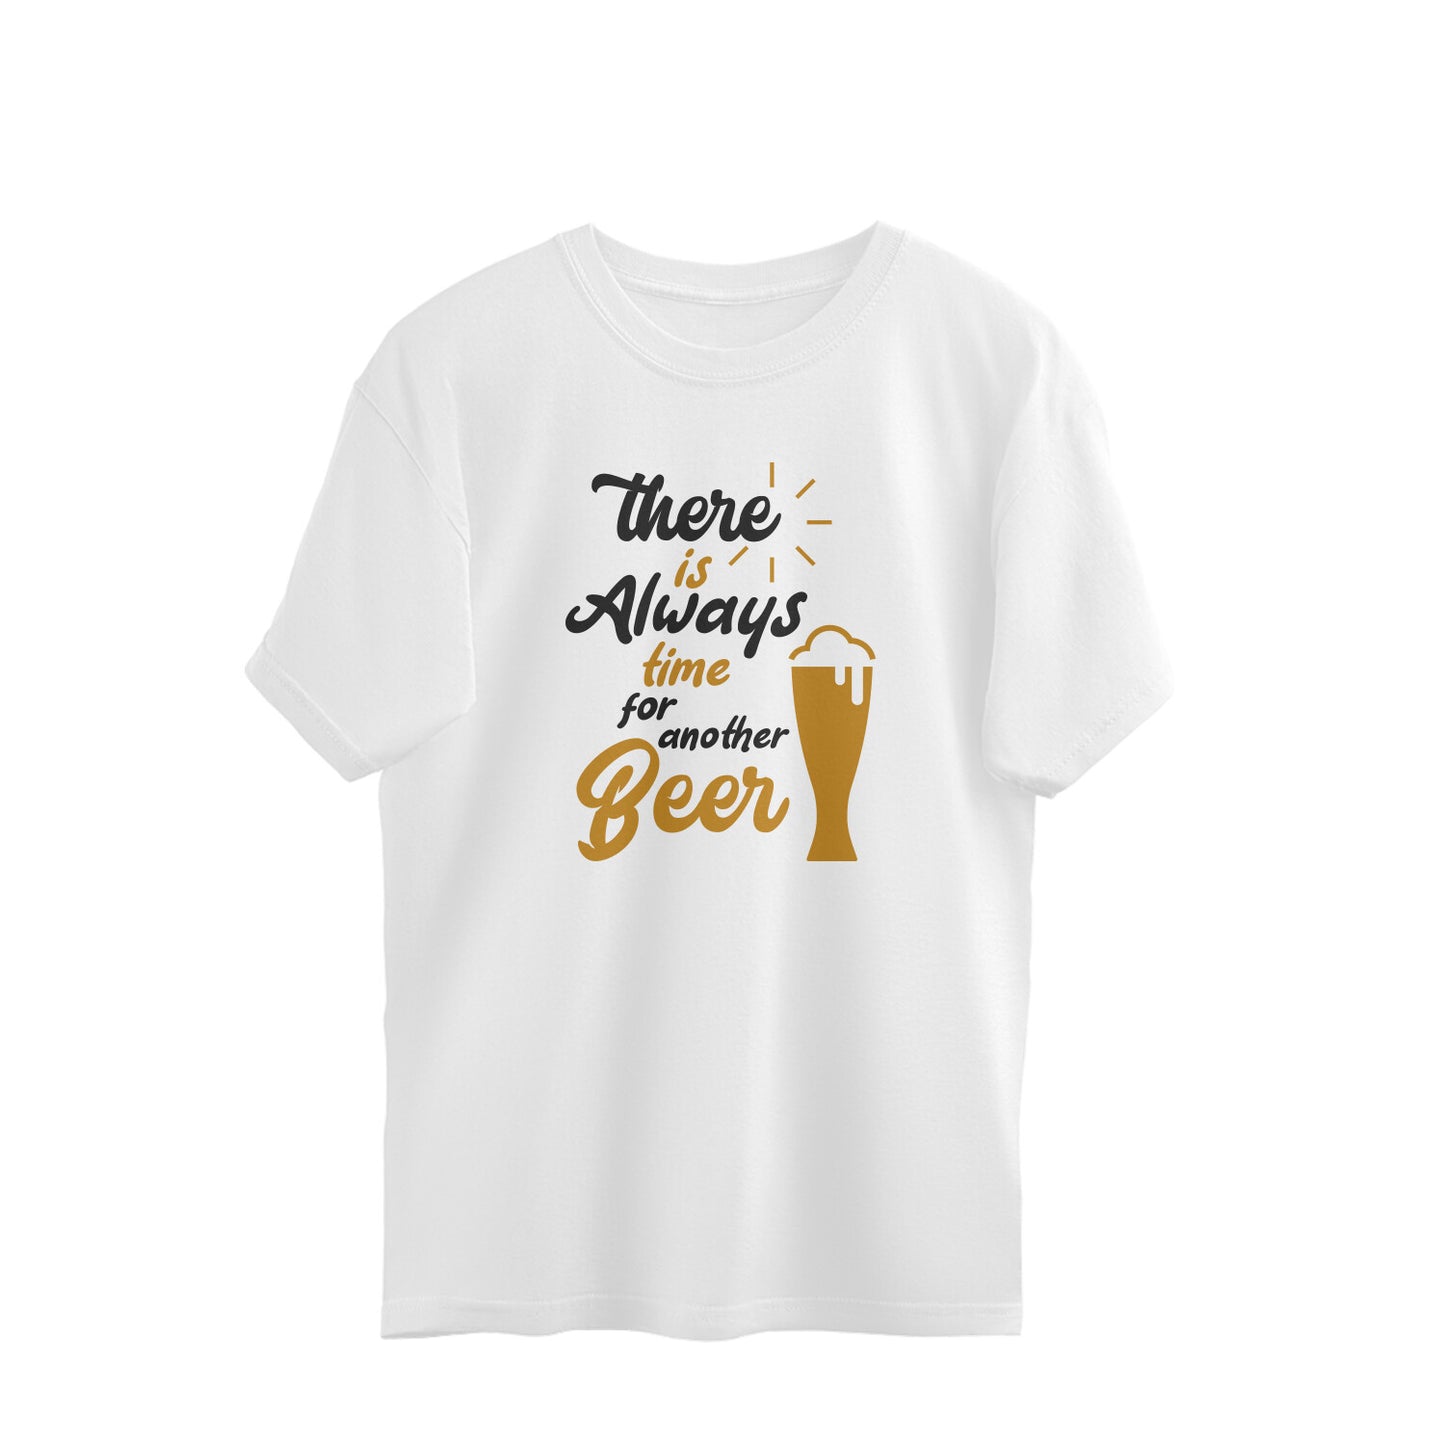 Always time for beer Tshirt -  Oversized